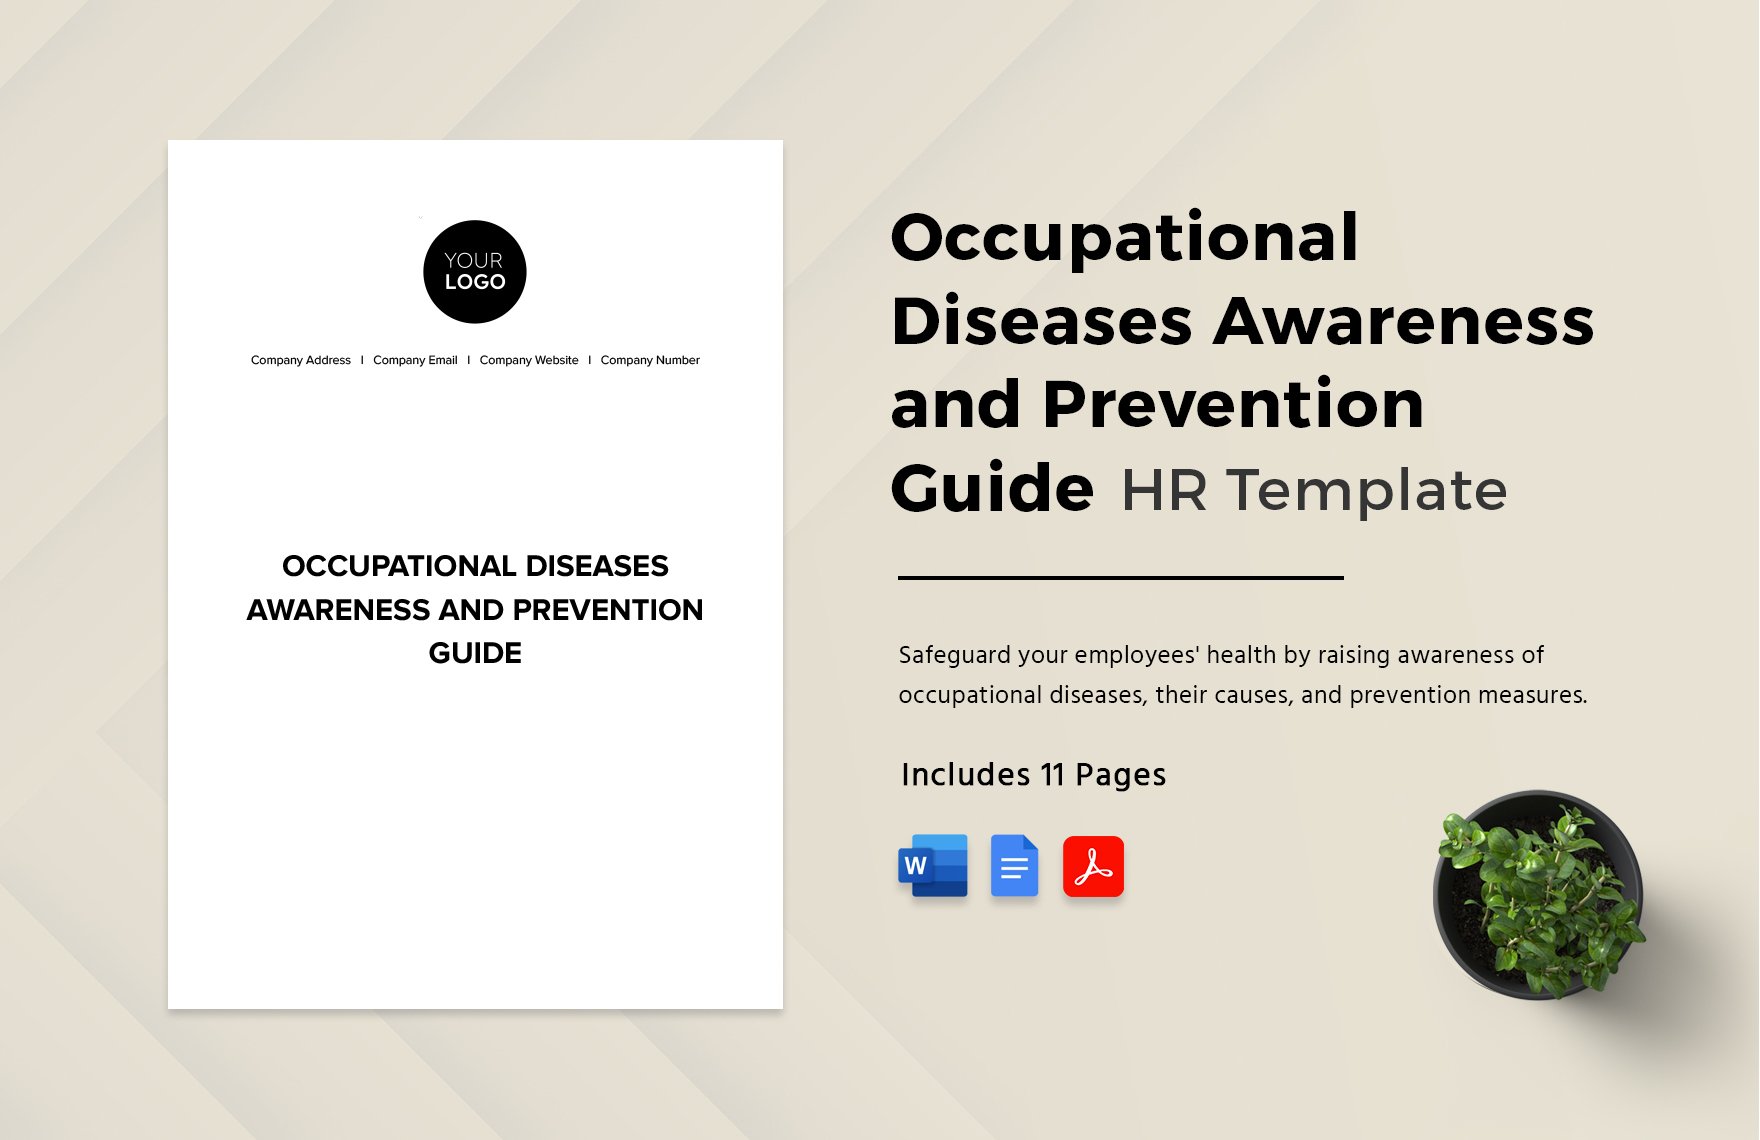 Occupational Diseases Awareness and Prevention Guide HR Template